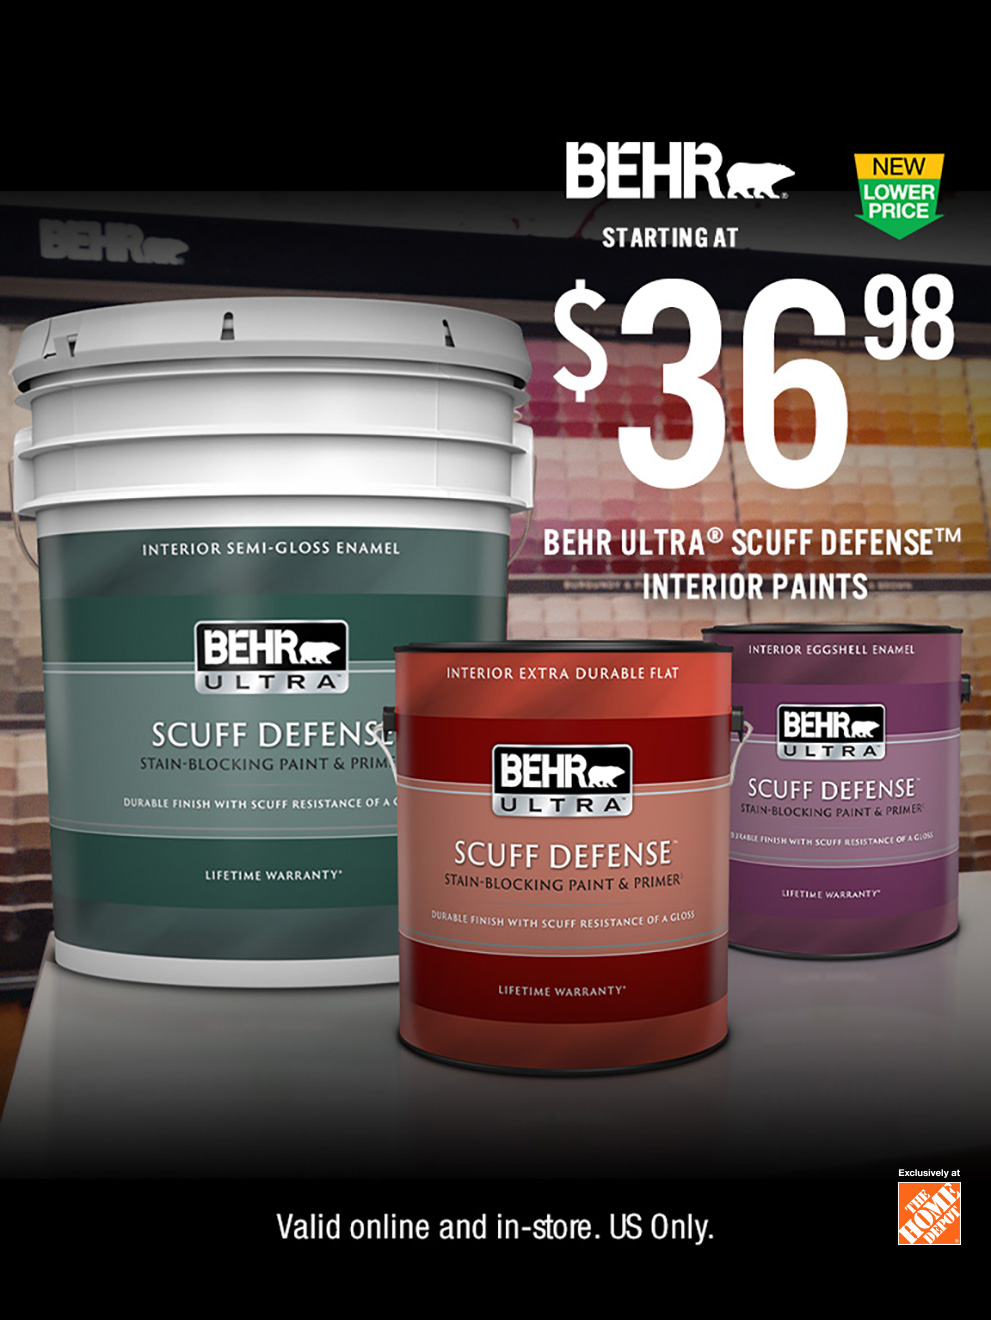 NEW LOWER PRICE! STARTING AT $36.98 BEHR ULTRA Scuff Defense